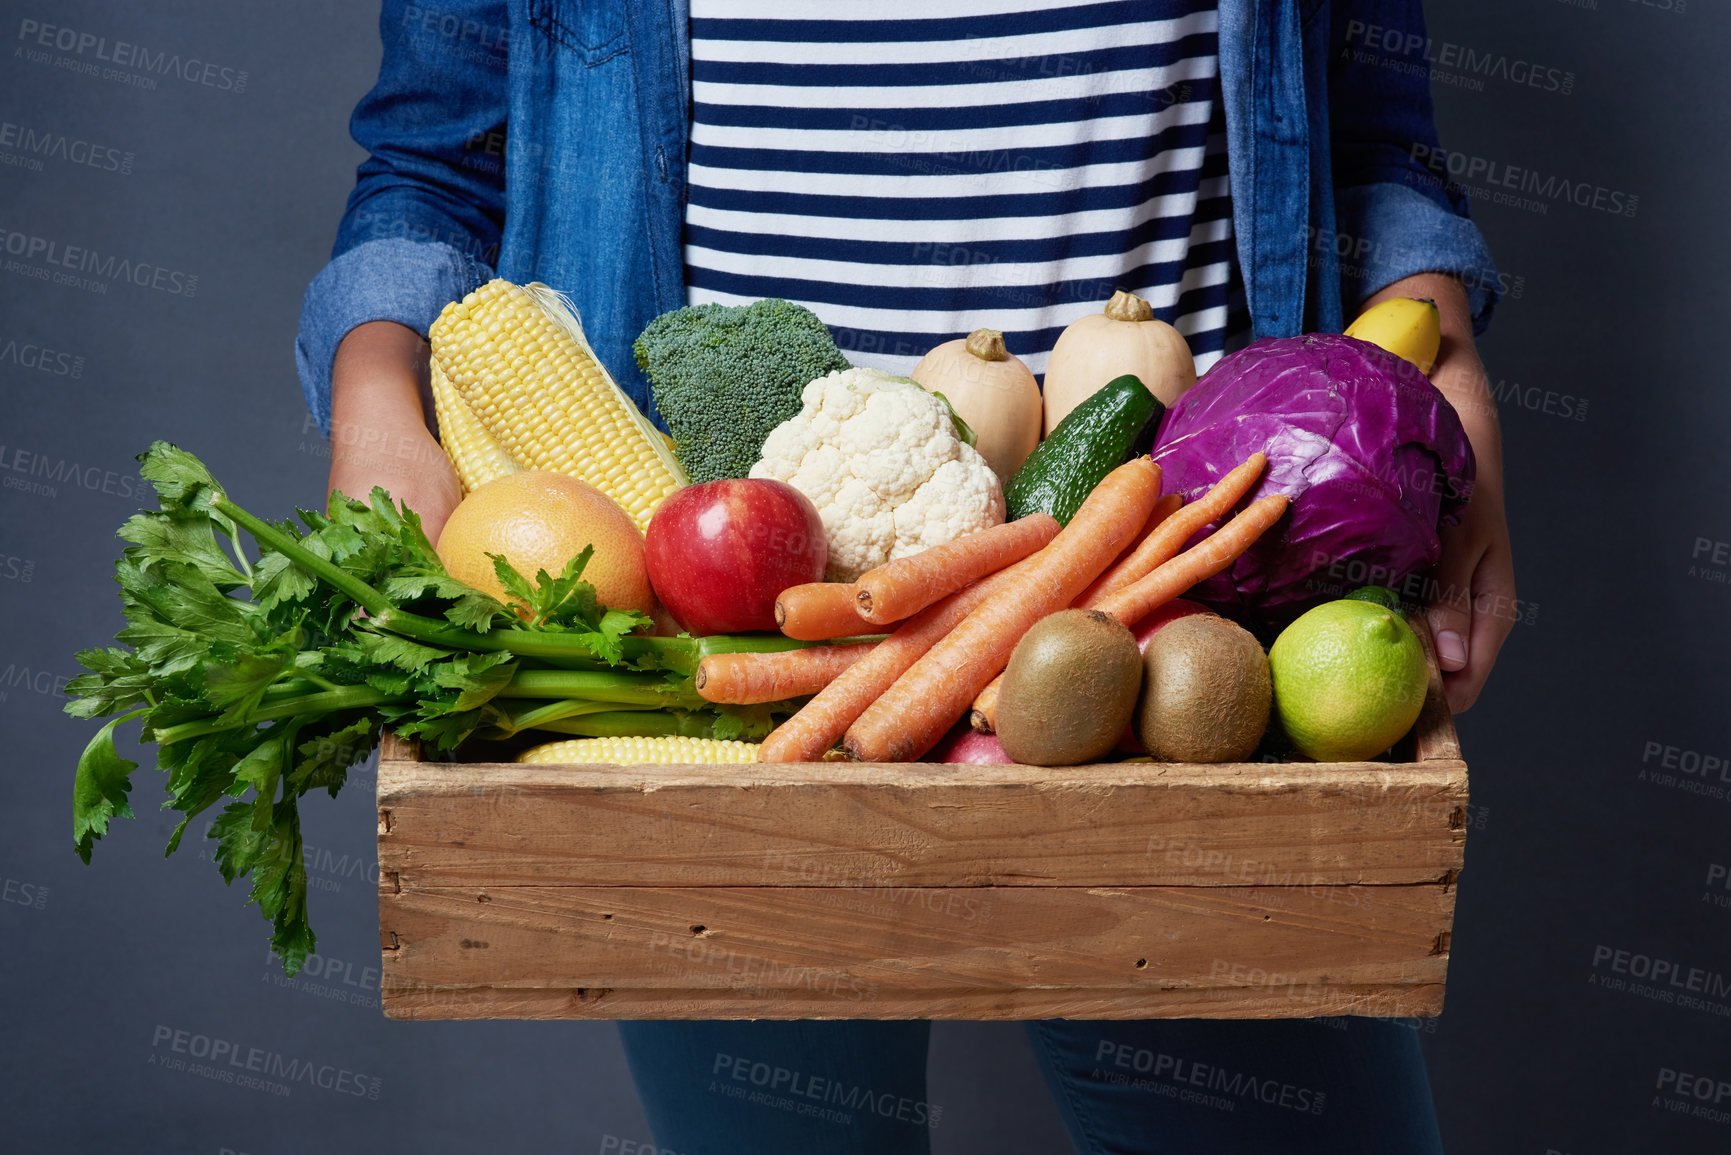 Buy stock photo Studio shot of an unrecognizable woman holding a wooden crate full of fruit and vegetables against a blue background